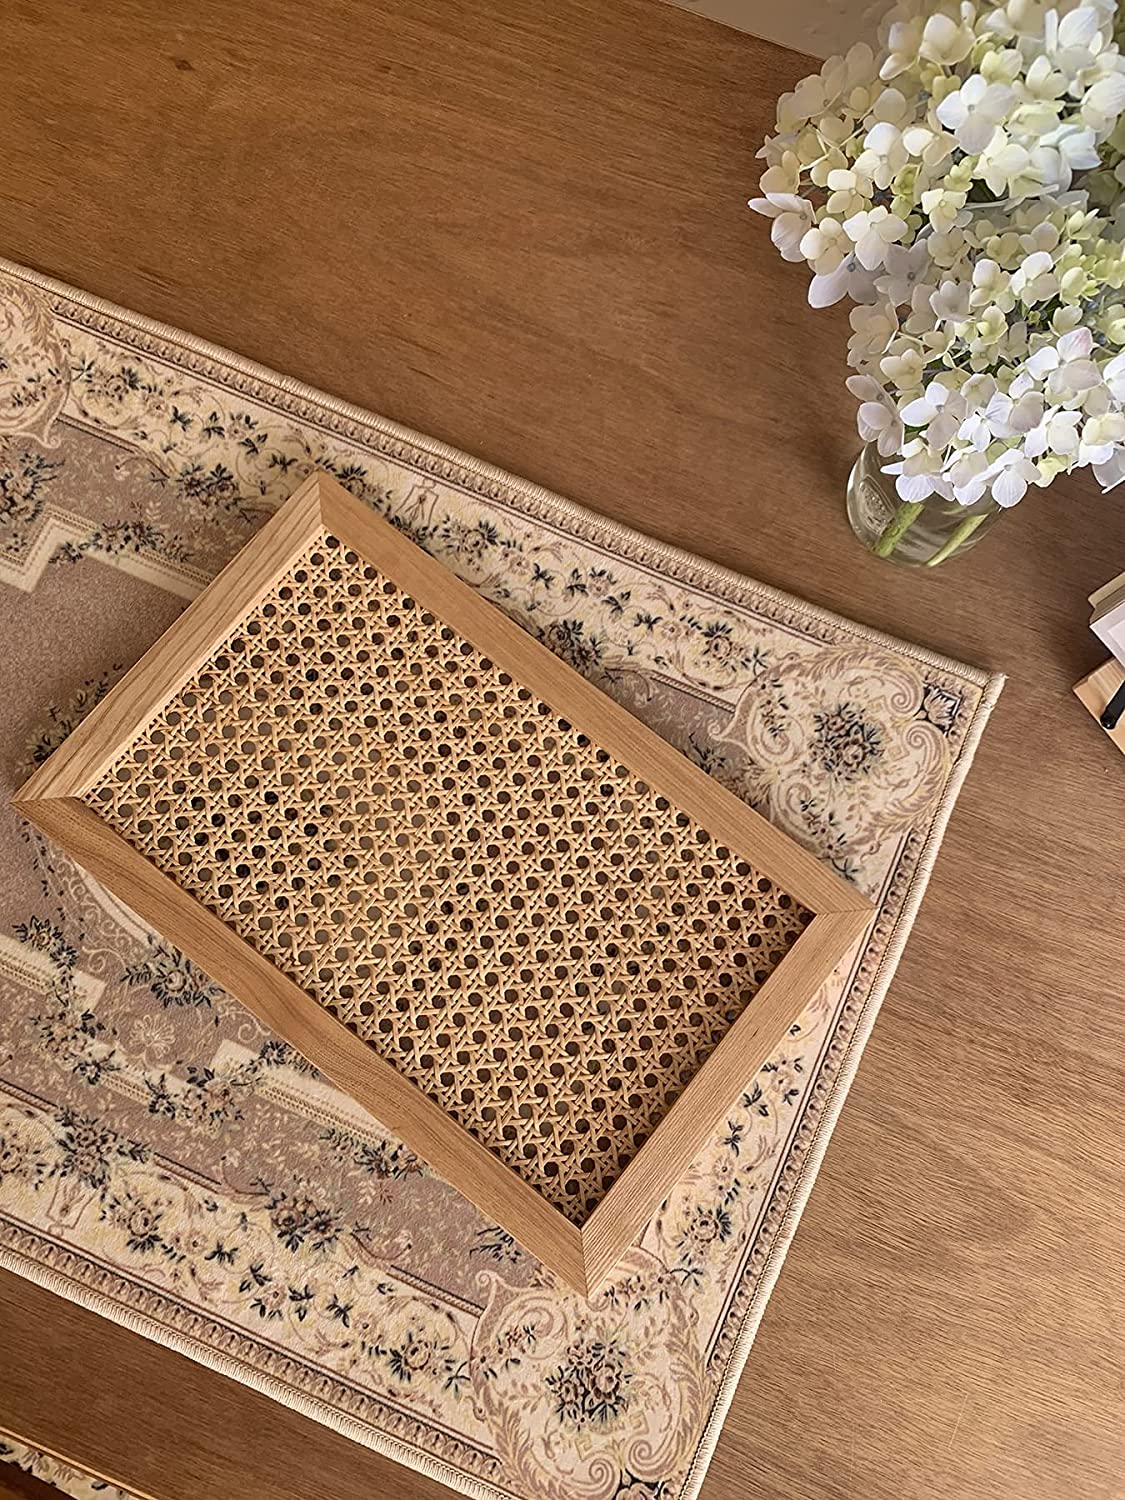 Rectangular Decorative Tray with Rattan Mesh and Solid Wood Frame